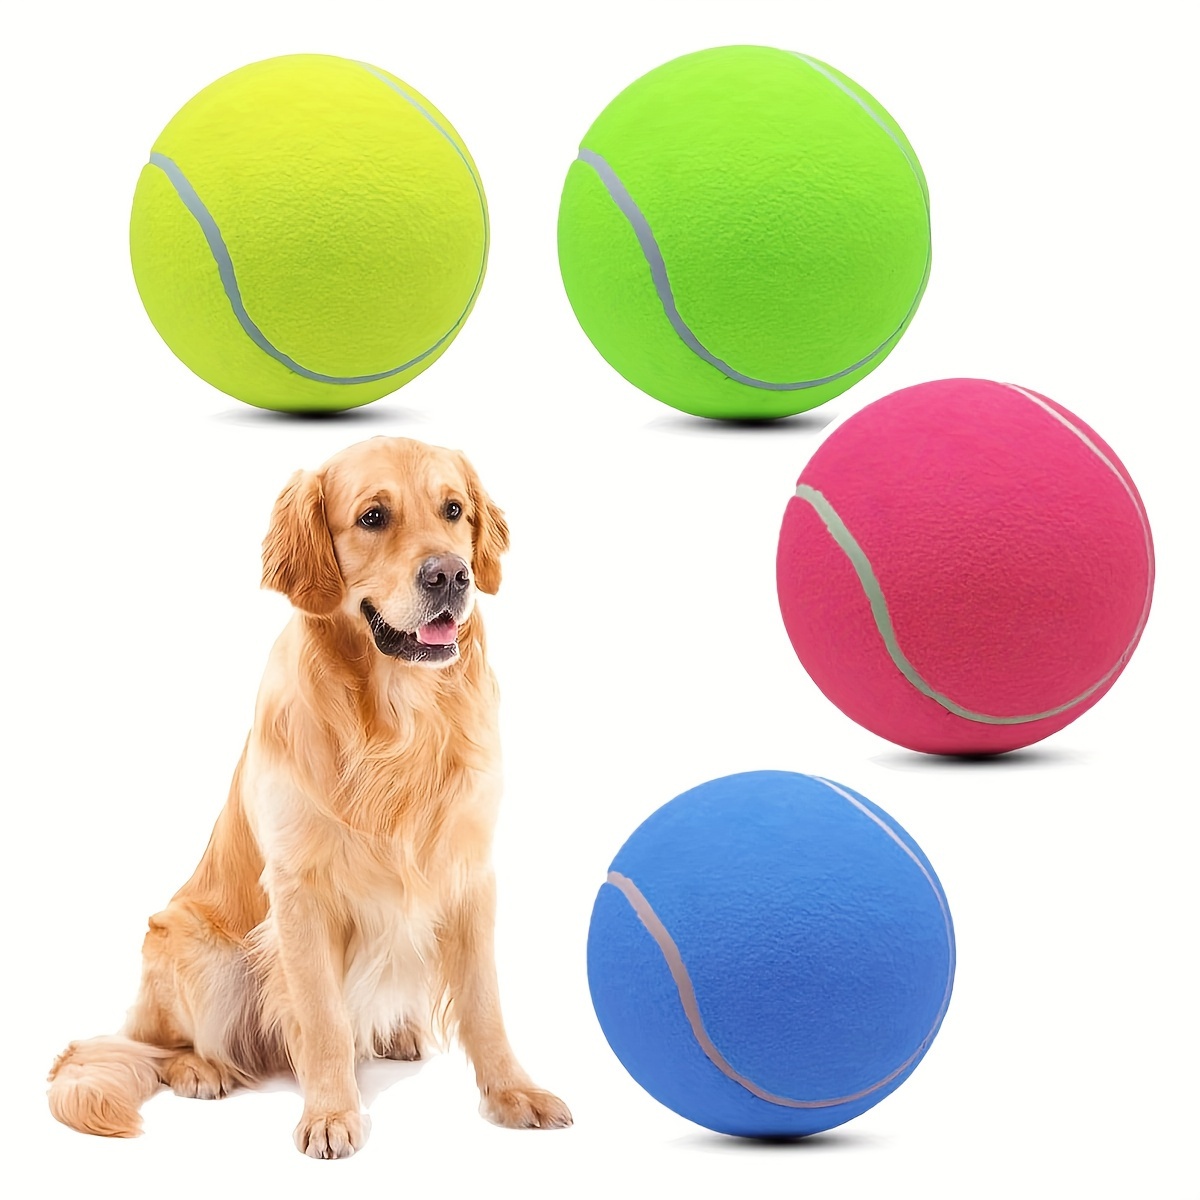 

4 Pack 9.5" Oversize Giant Tennis Ball Dog Tennis Ball Large Pet Chew Toy For Outdoor/indoor Sports Dog Ball Gift With Needle